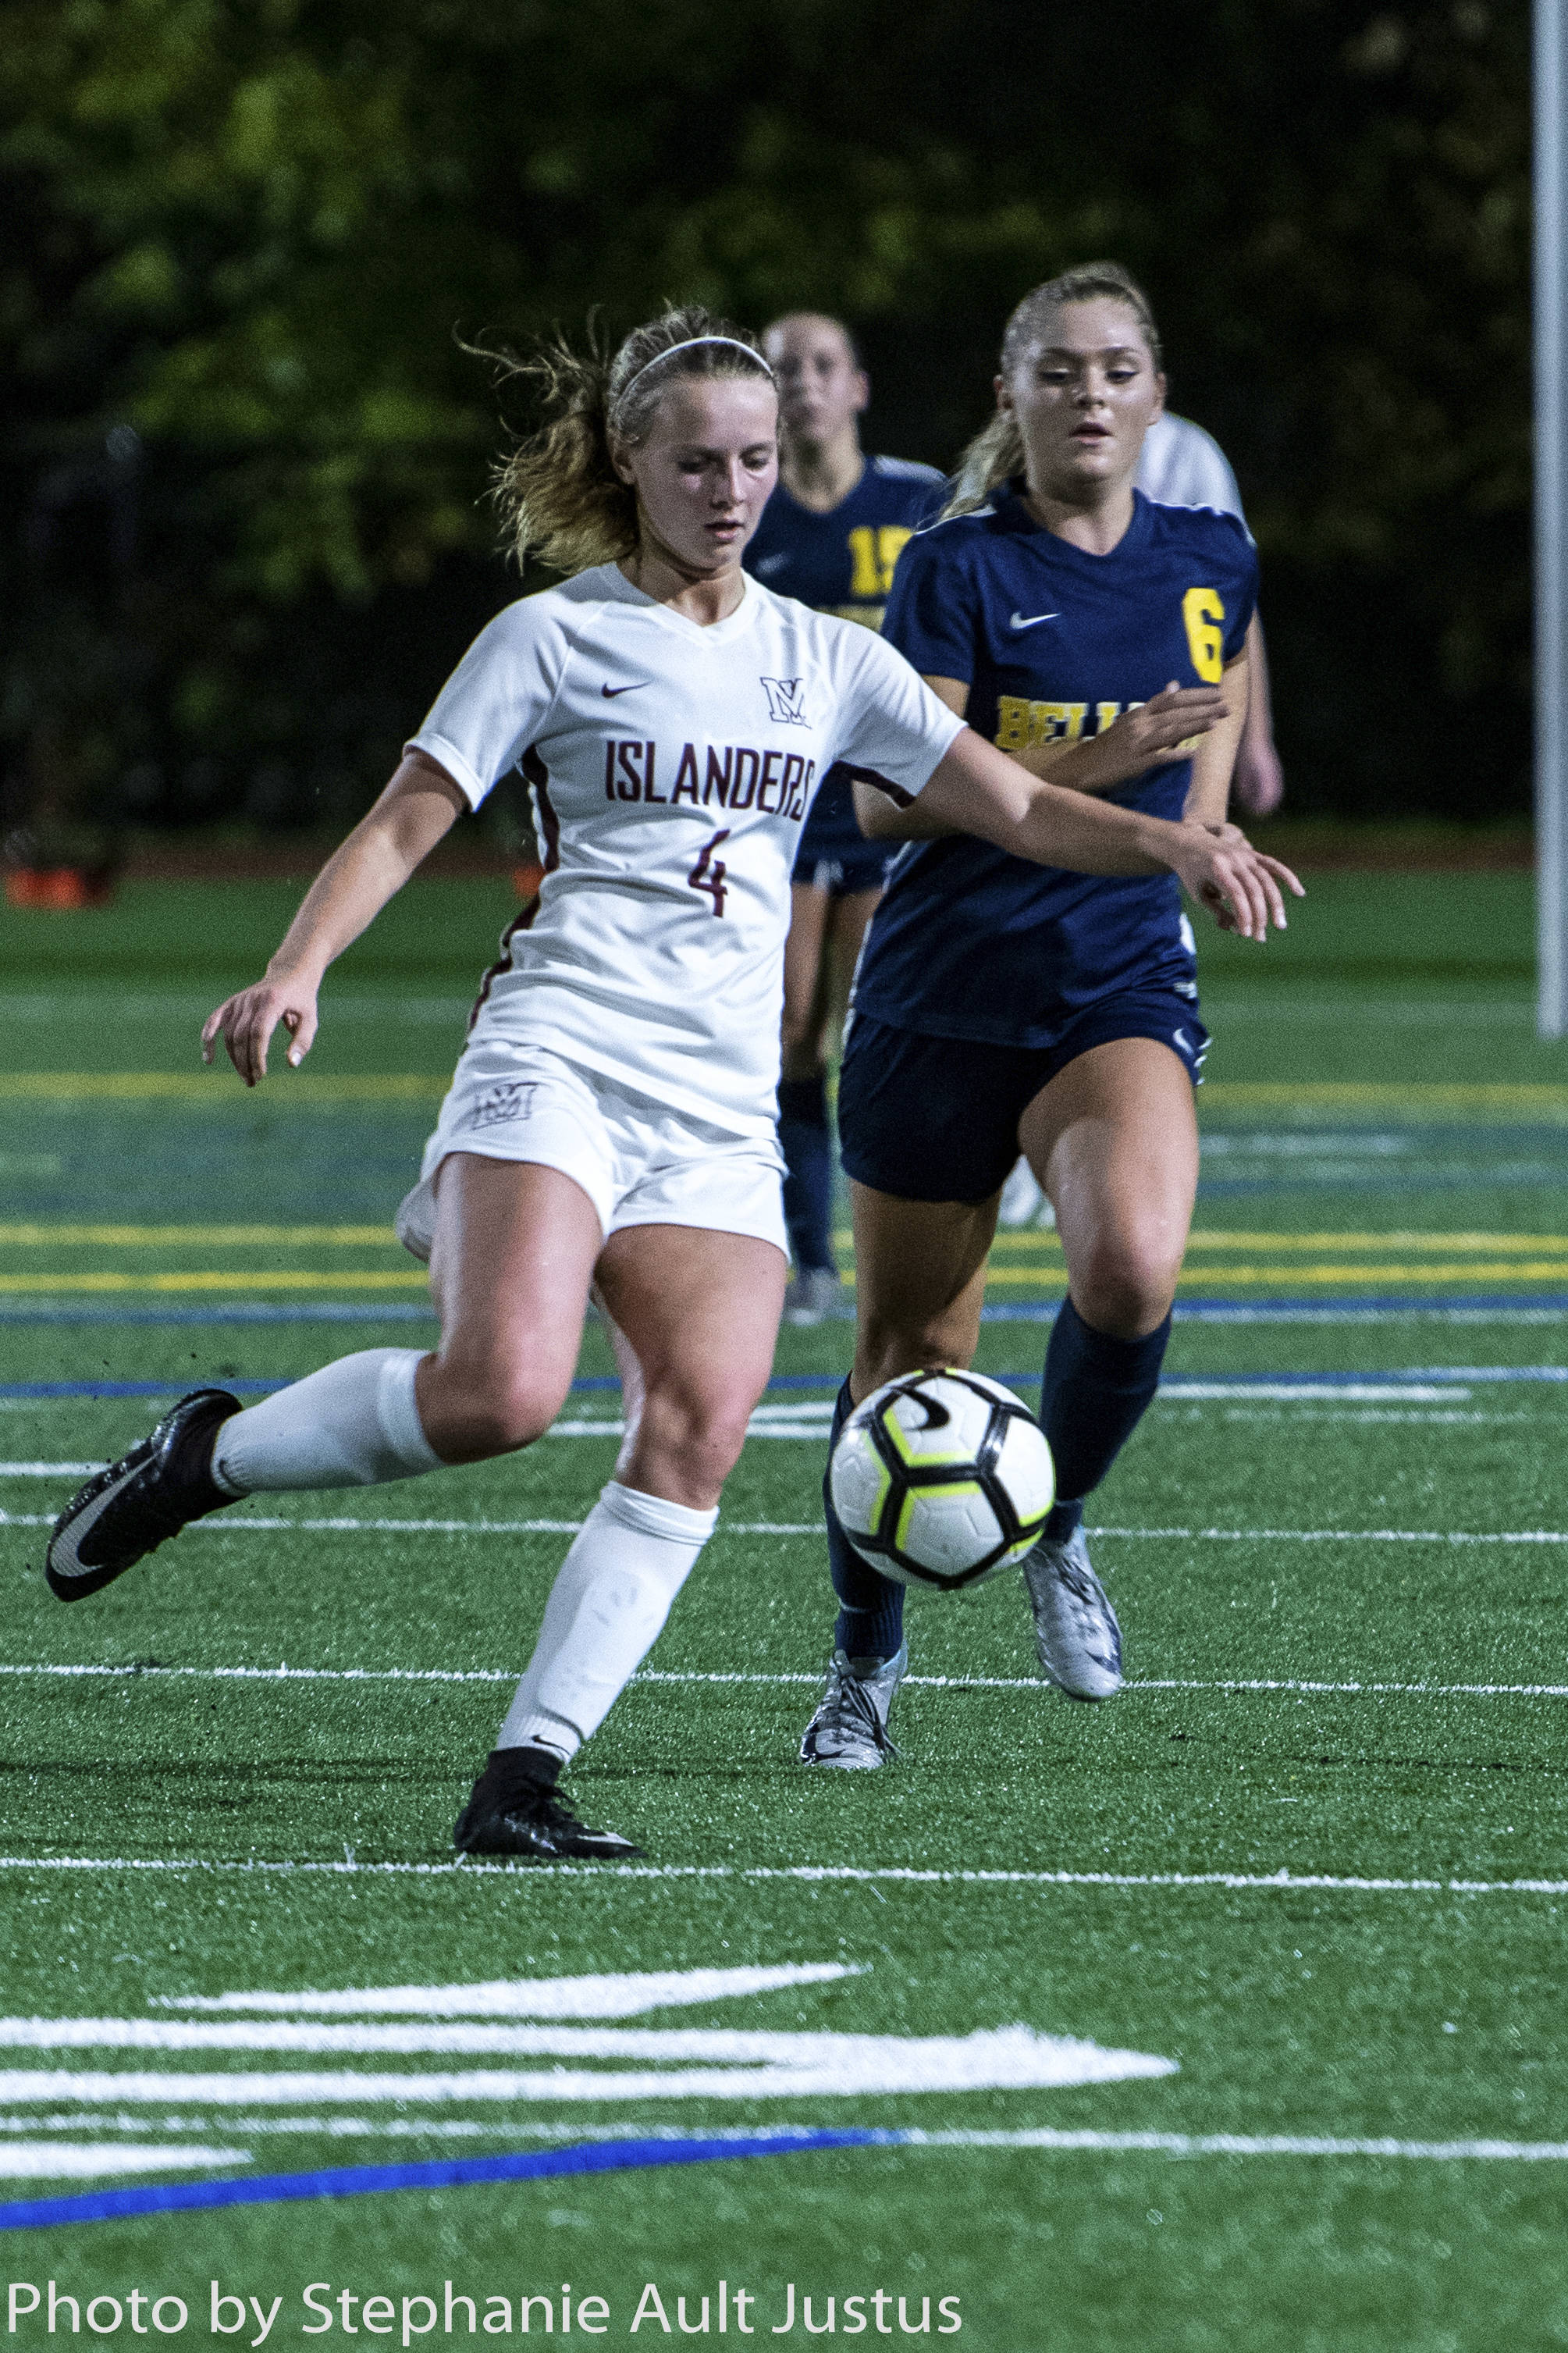 The Mercer Island Islanders girls soccer team captured a 1-0 victory against the Bellevue Wolverines on Oct. 25 in the regular season finale for both teams. Jackie Stenberg (pictured) scored the lone goal of the game between rival schools. The Islanders finished the 2018 regular season with an overall record of 15-0-1. Photo courtesy of Stephanie Ault Justus